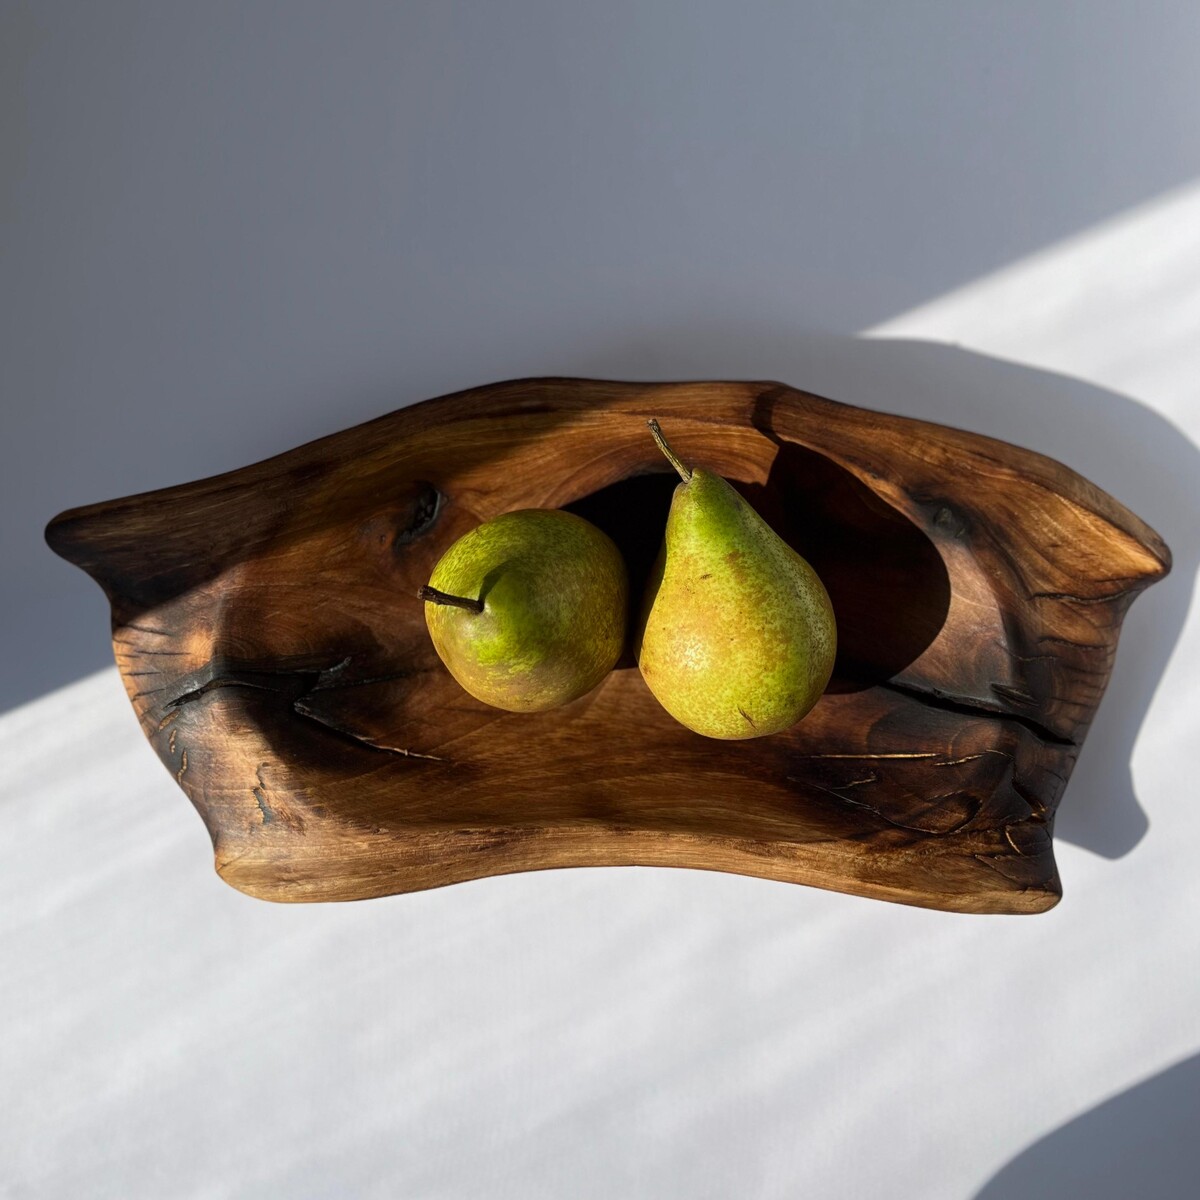 Handcrafted rustic bowl